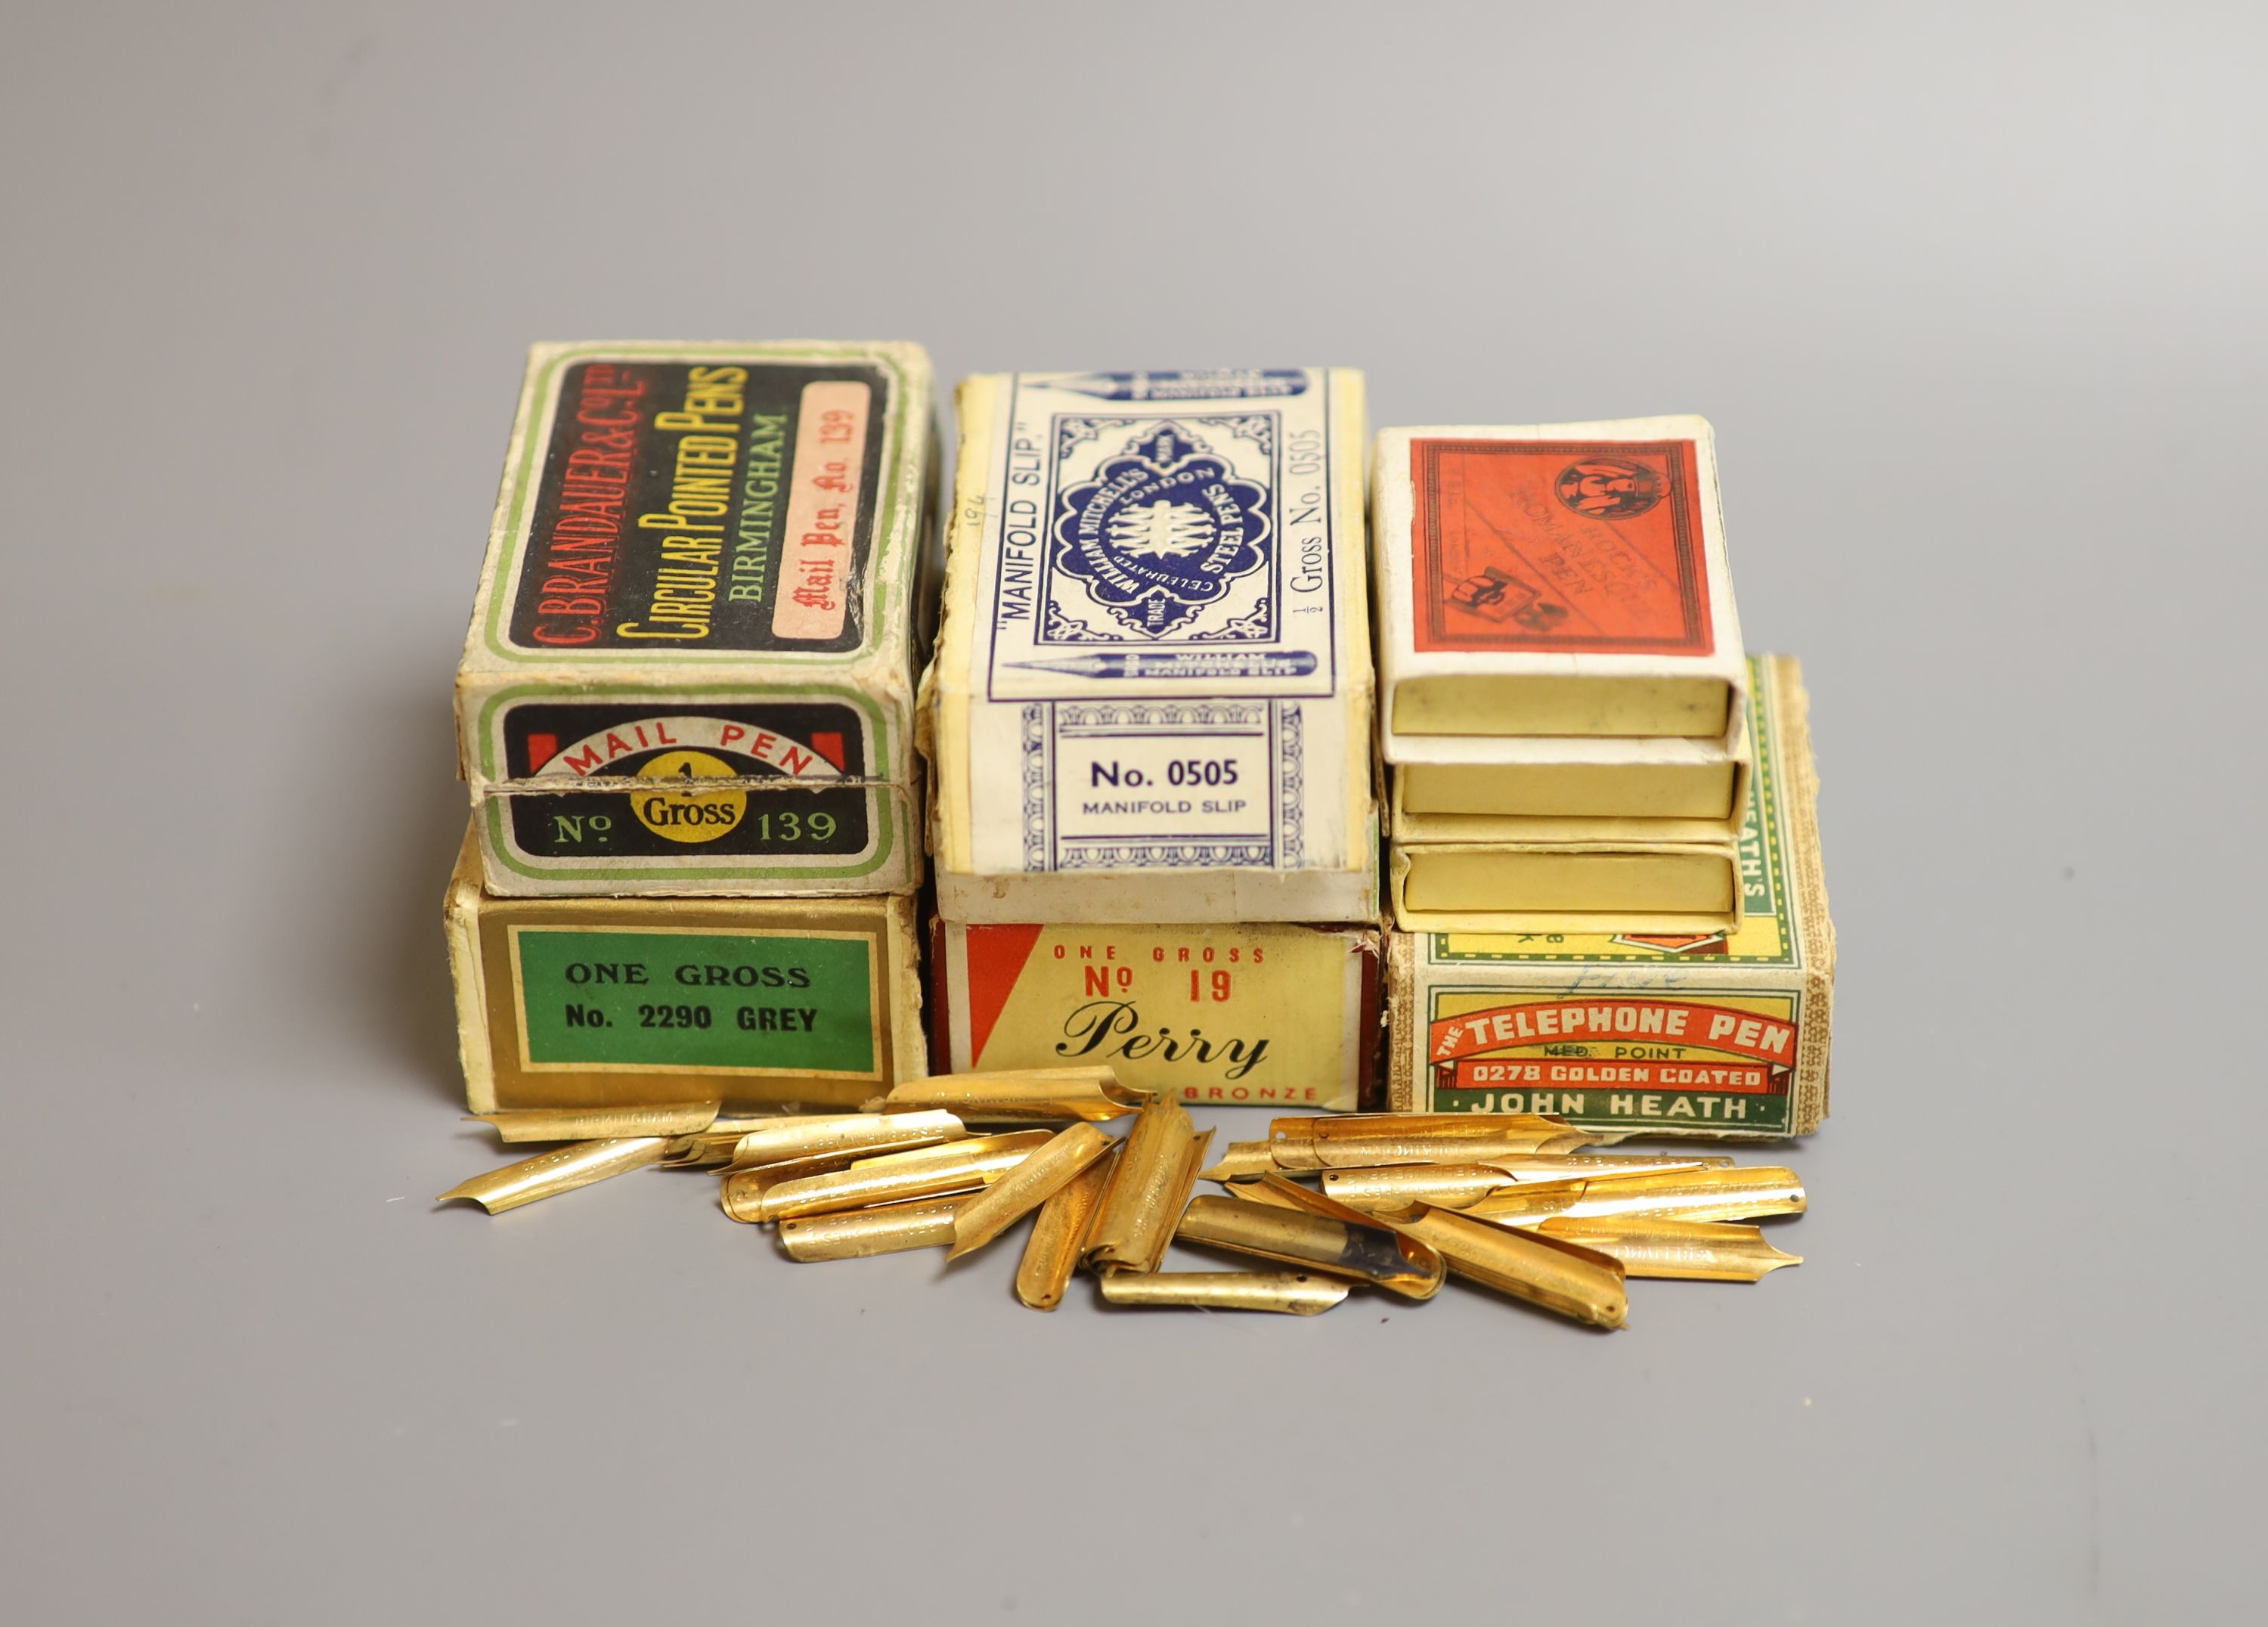 Early pen nib boxes with a larger quantity of dip pen nibs